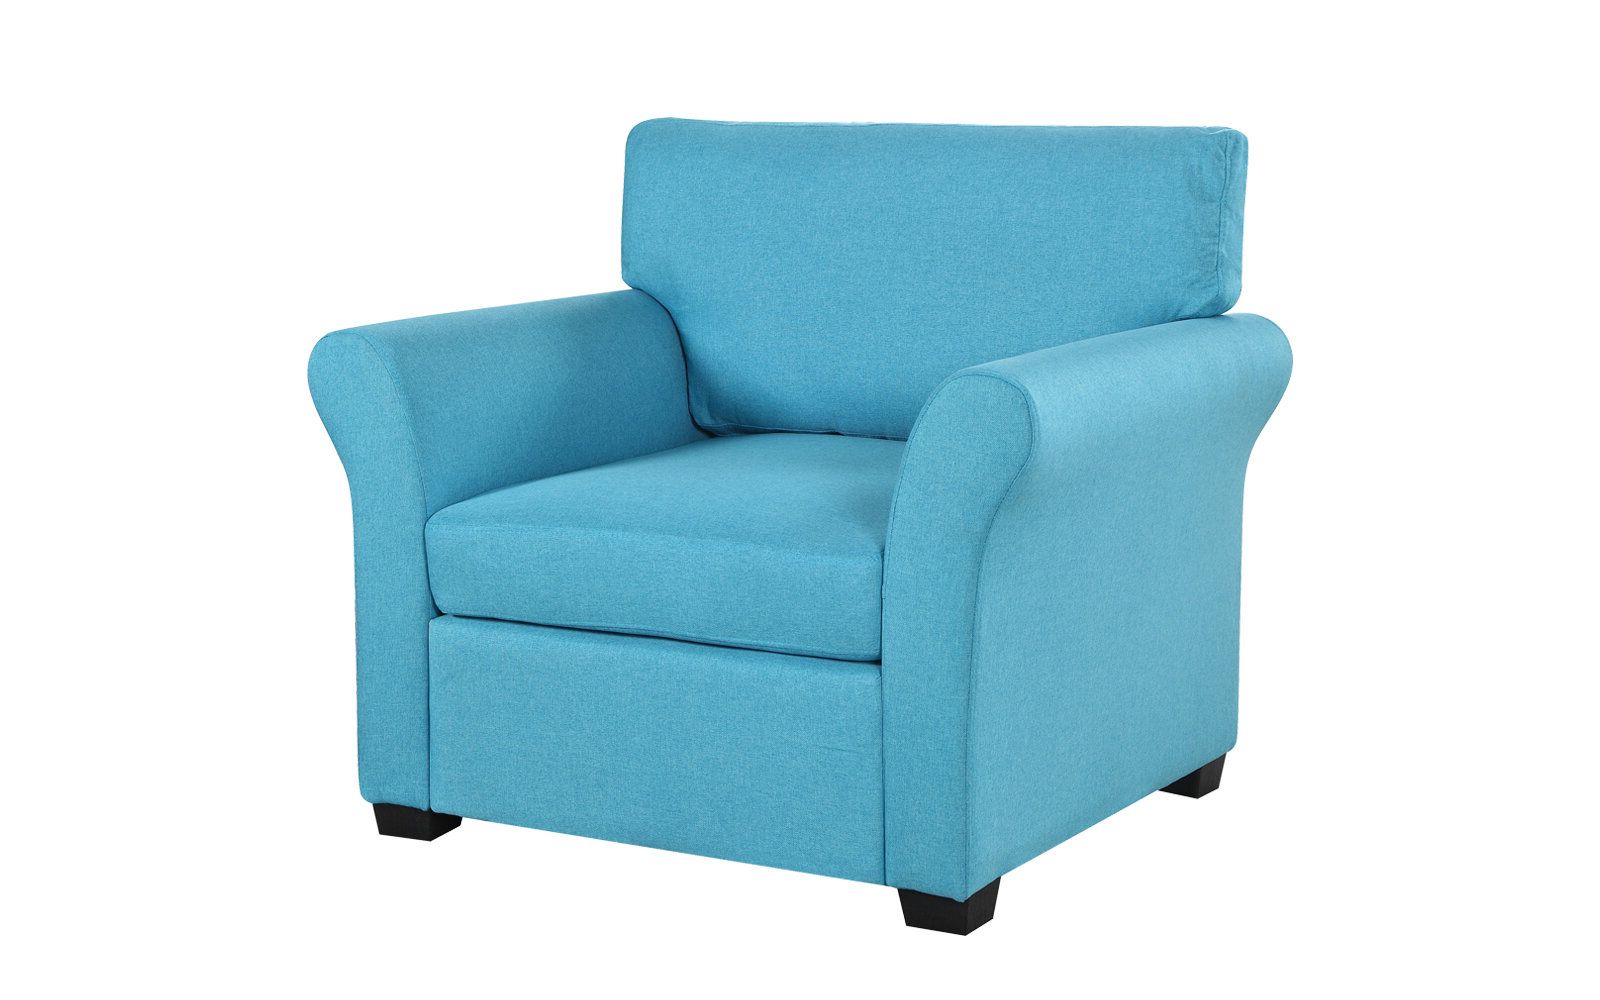 Oglesby Armchair Within Most Popular Oglesby Armchairs (View 2 of 20)